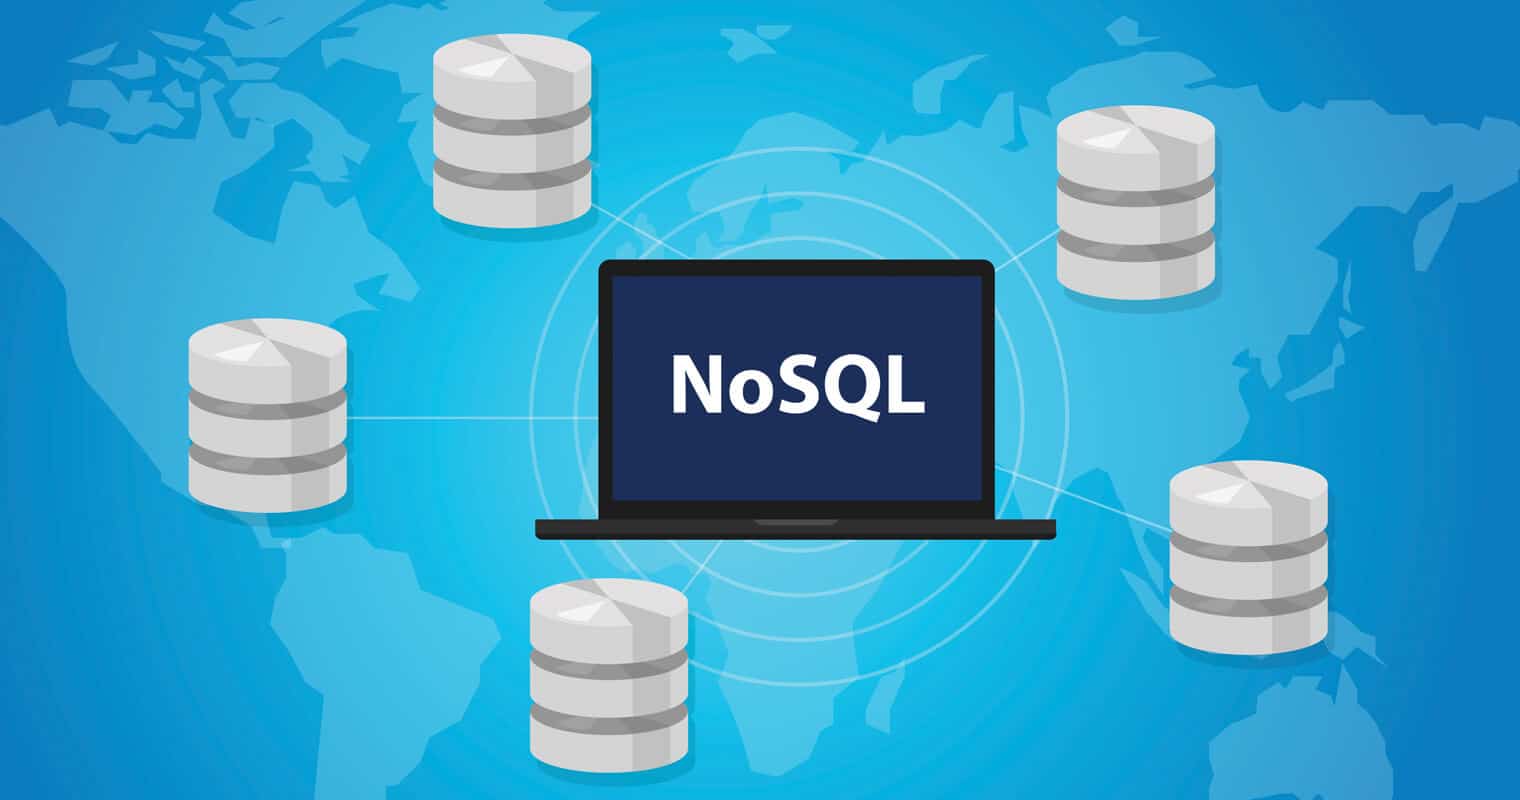 Illustration of a laptop with 'NoSQL' on the screen, surrounded by database icons, symbolizing NoSQL databases in a global network context.